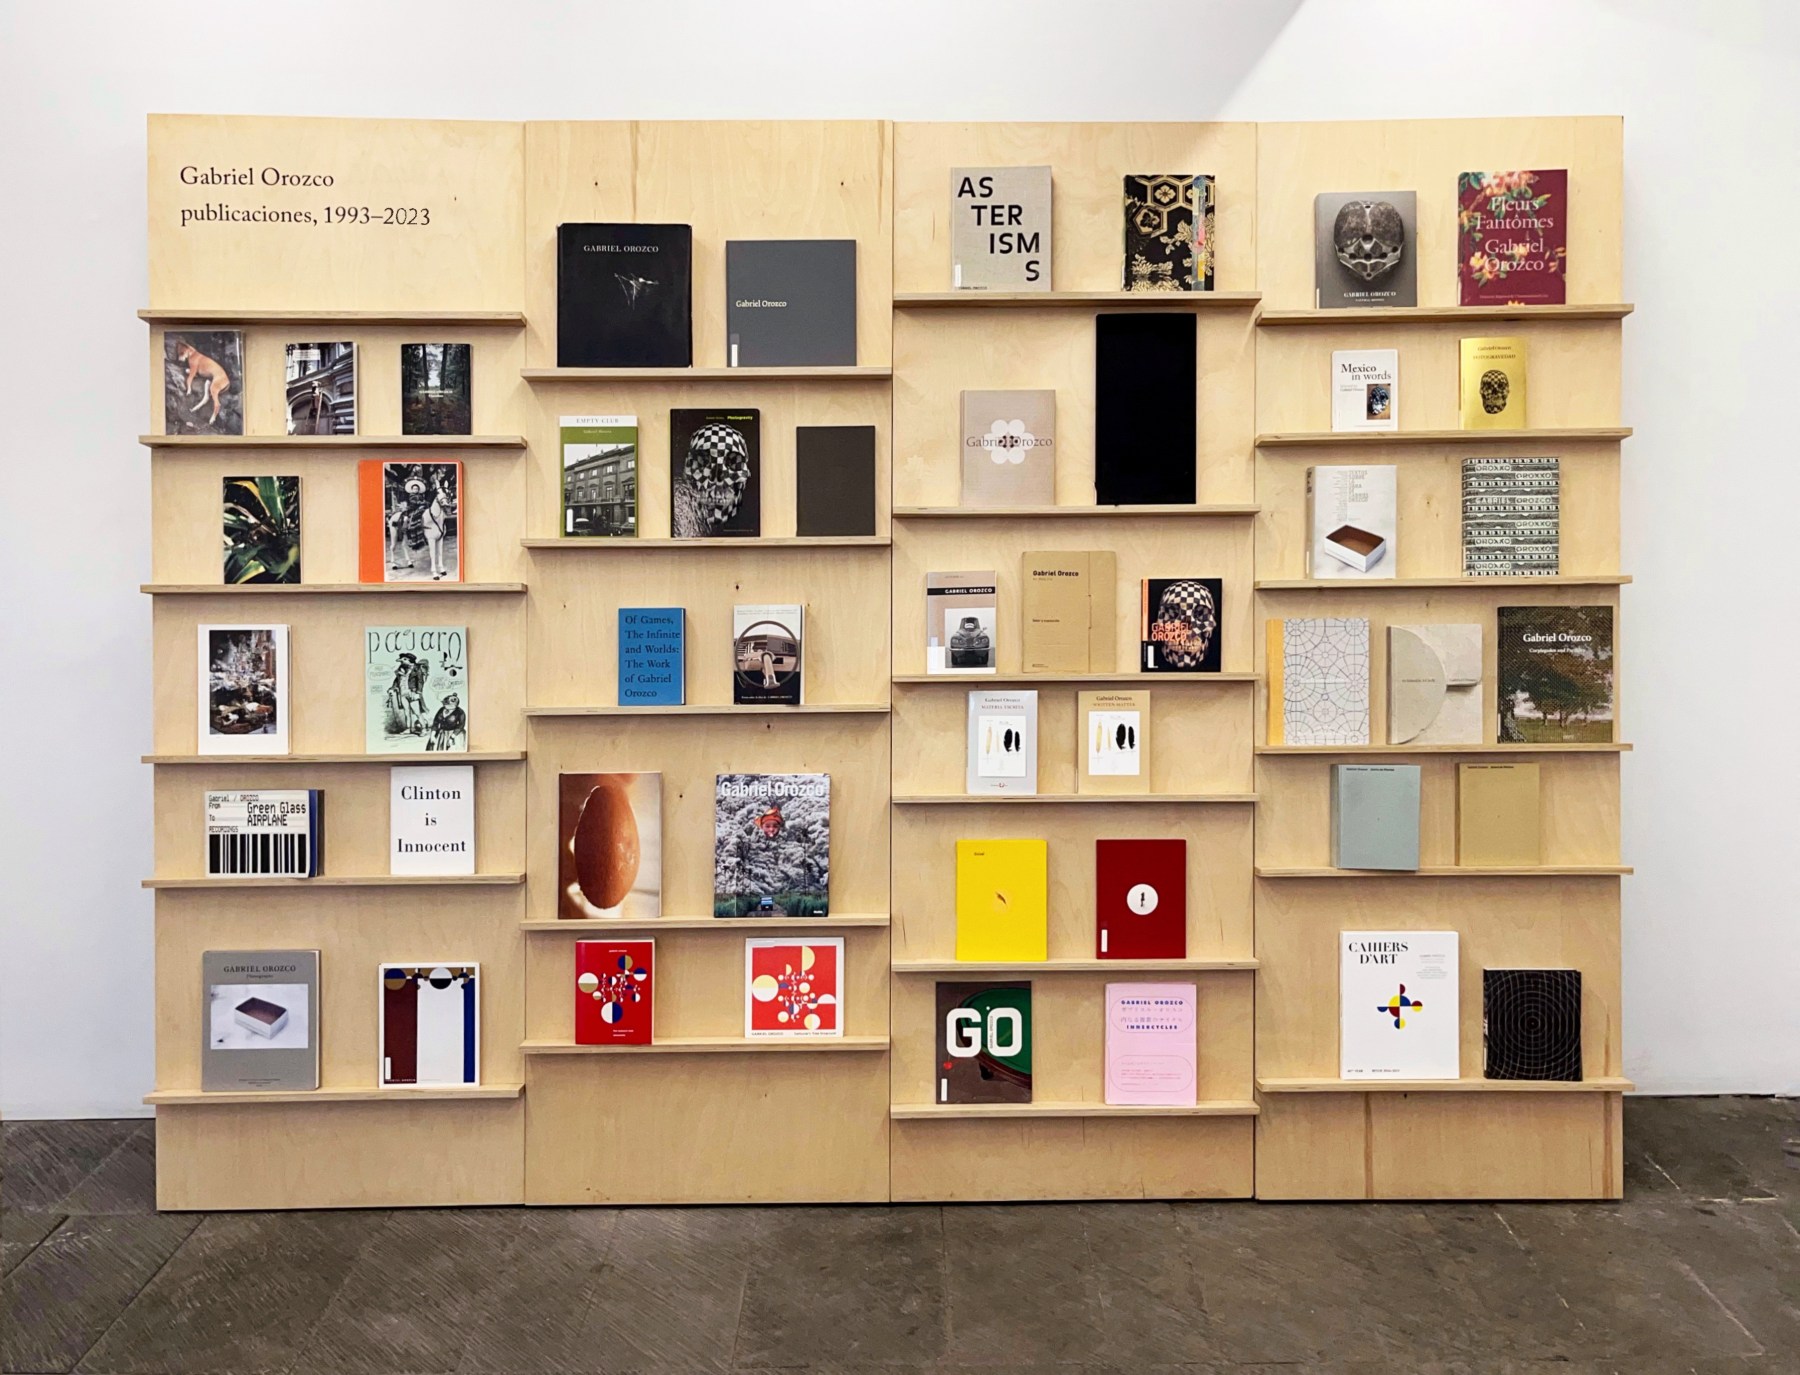 A display of Gabriel Orozco&amp;rsquo;s publications installed in the bookstore and available to all visitors at kurimanzutto, Mexico City